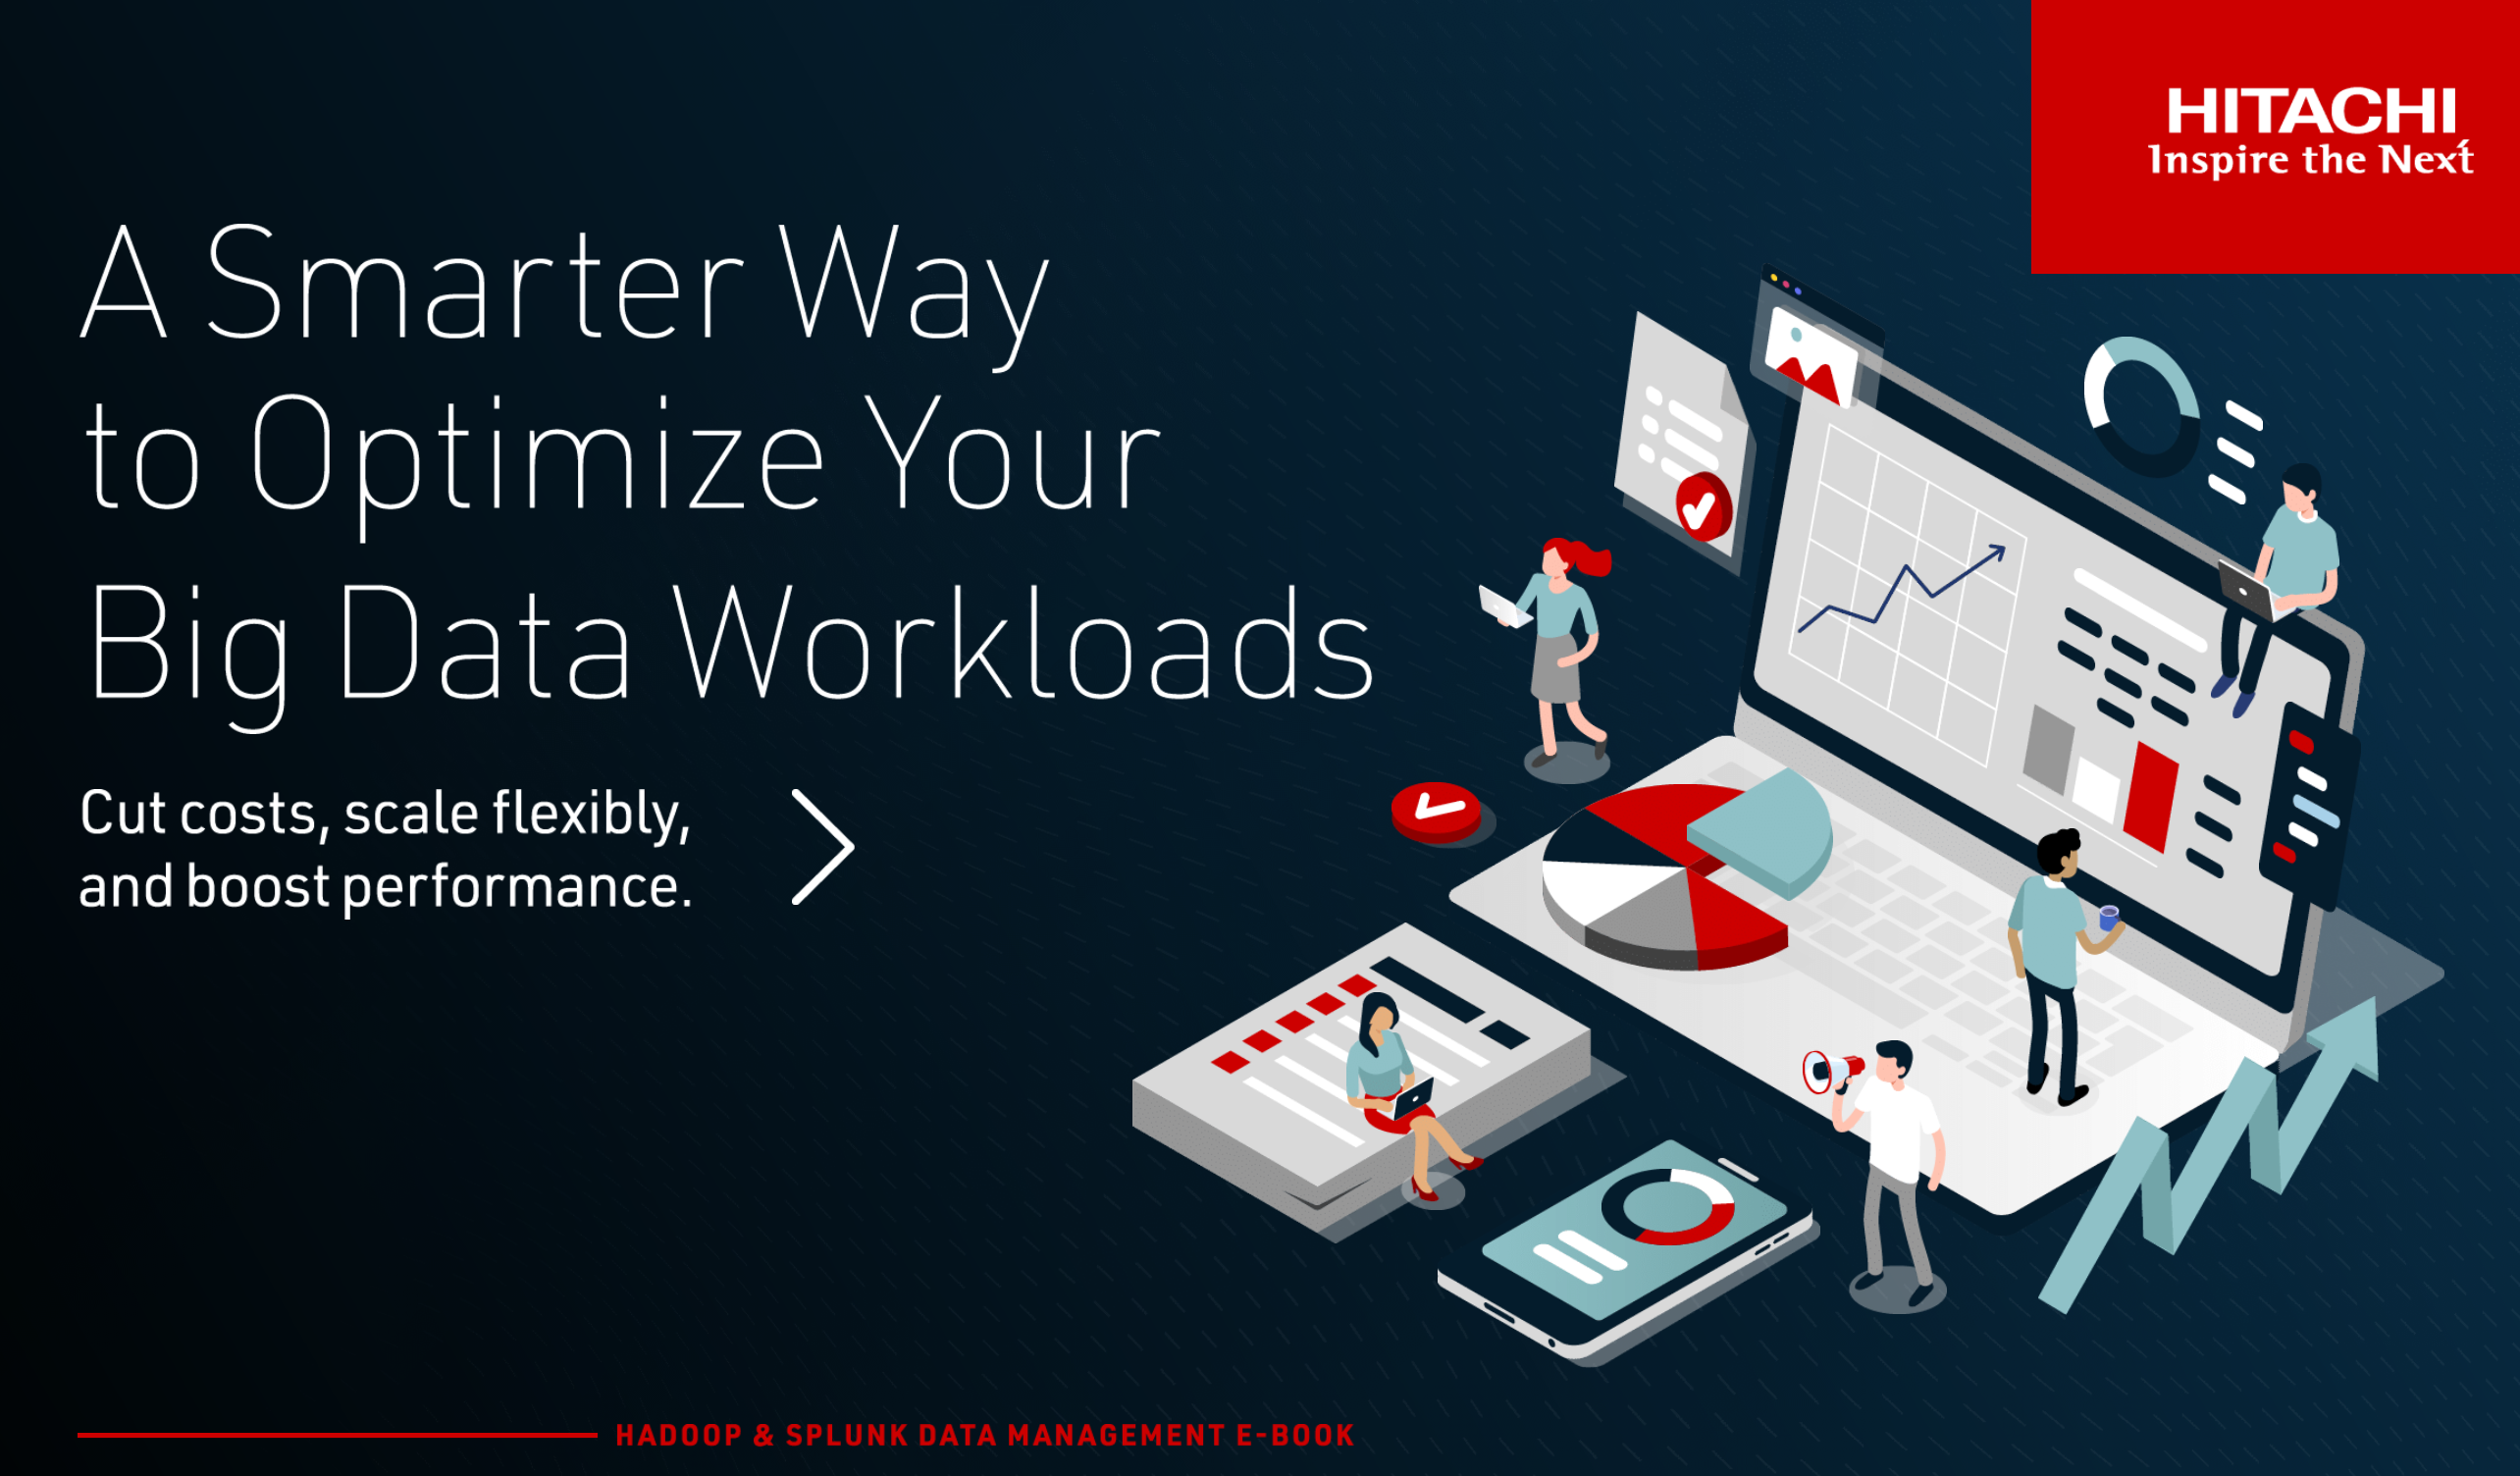 A Smarter Way to Optimize Your Big Data Workloads